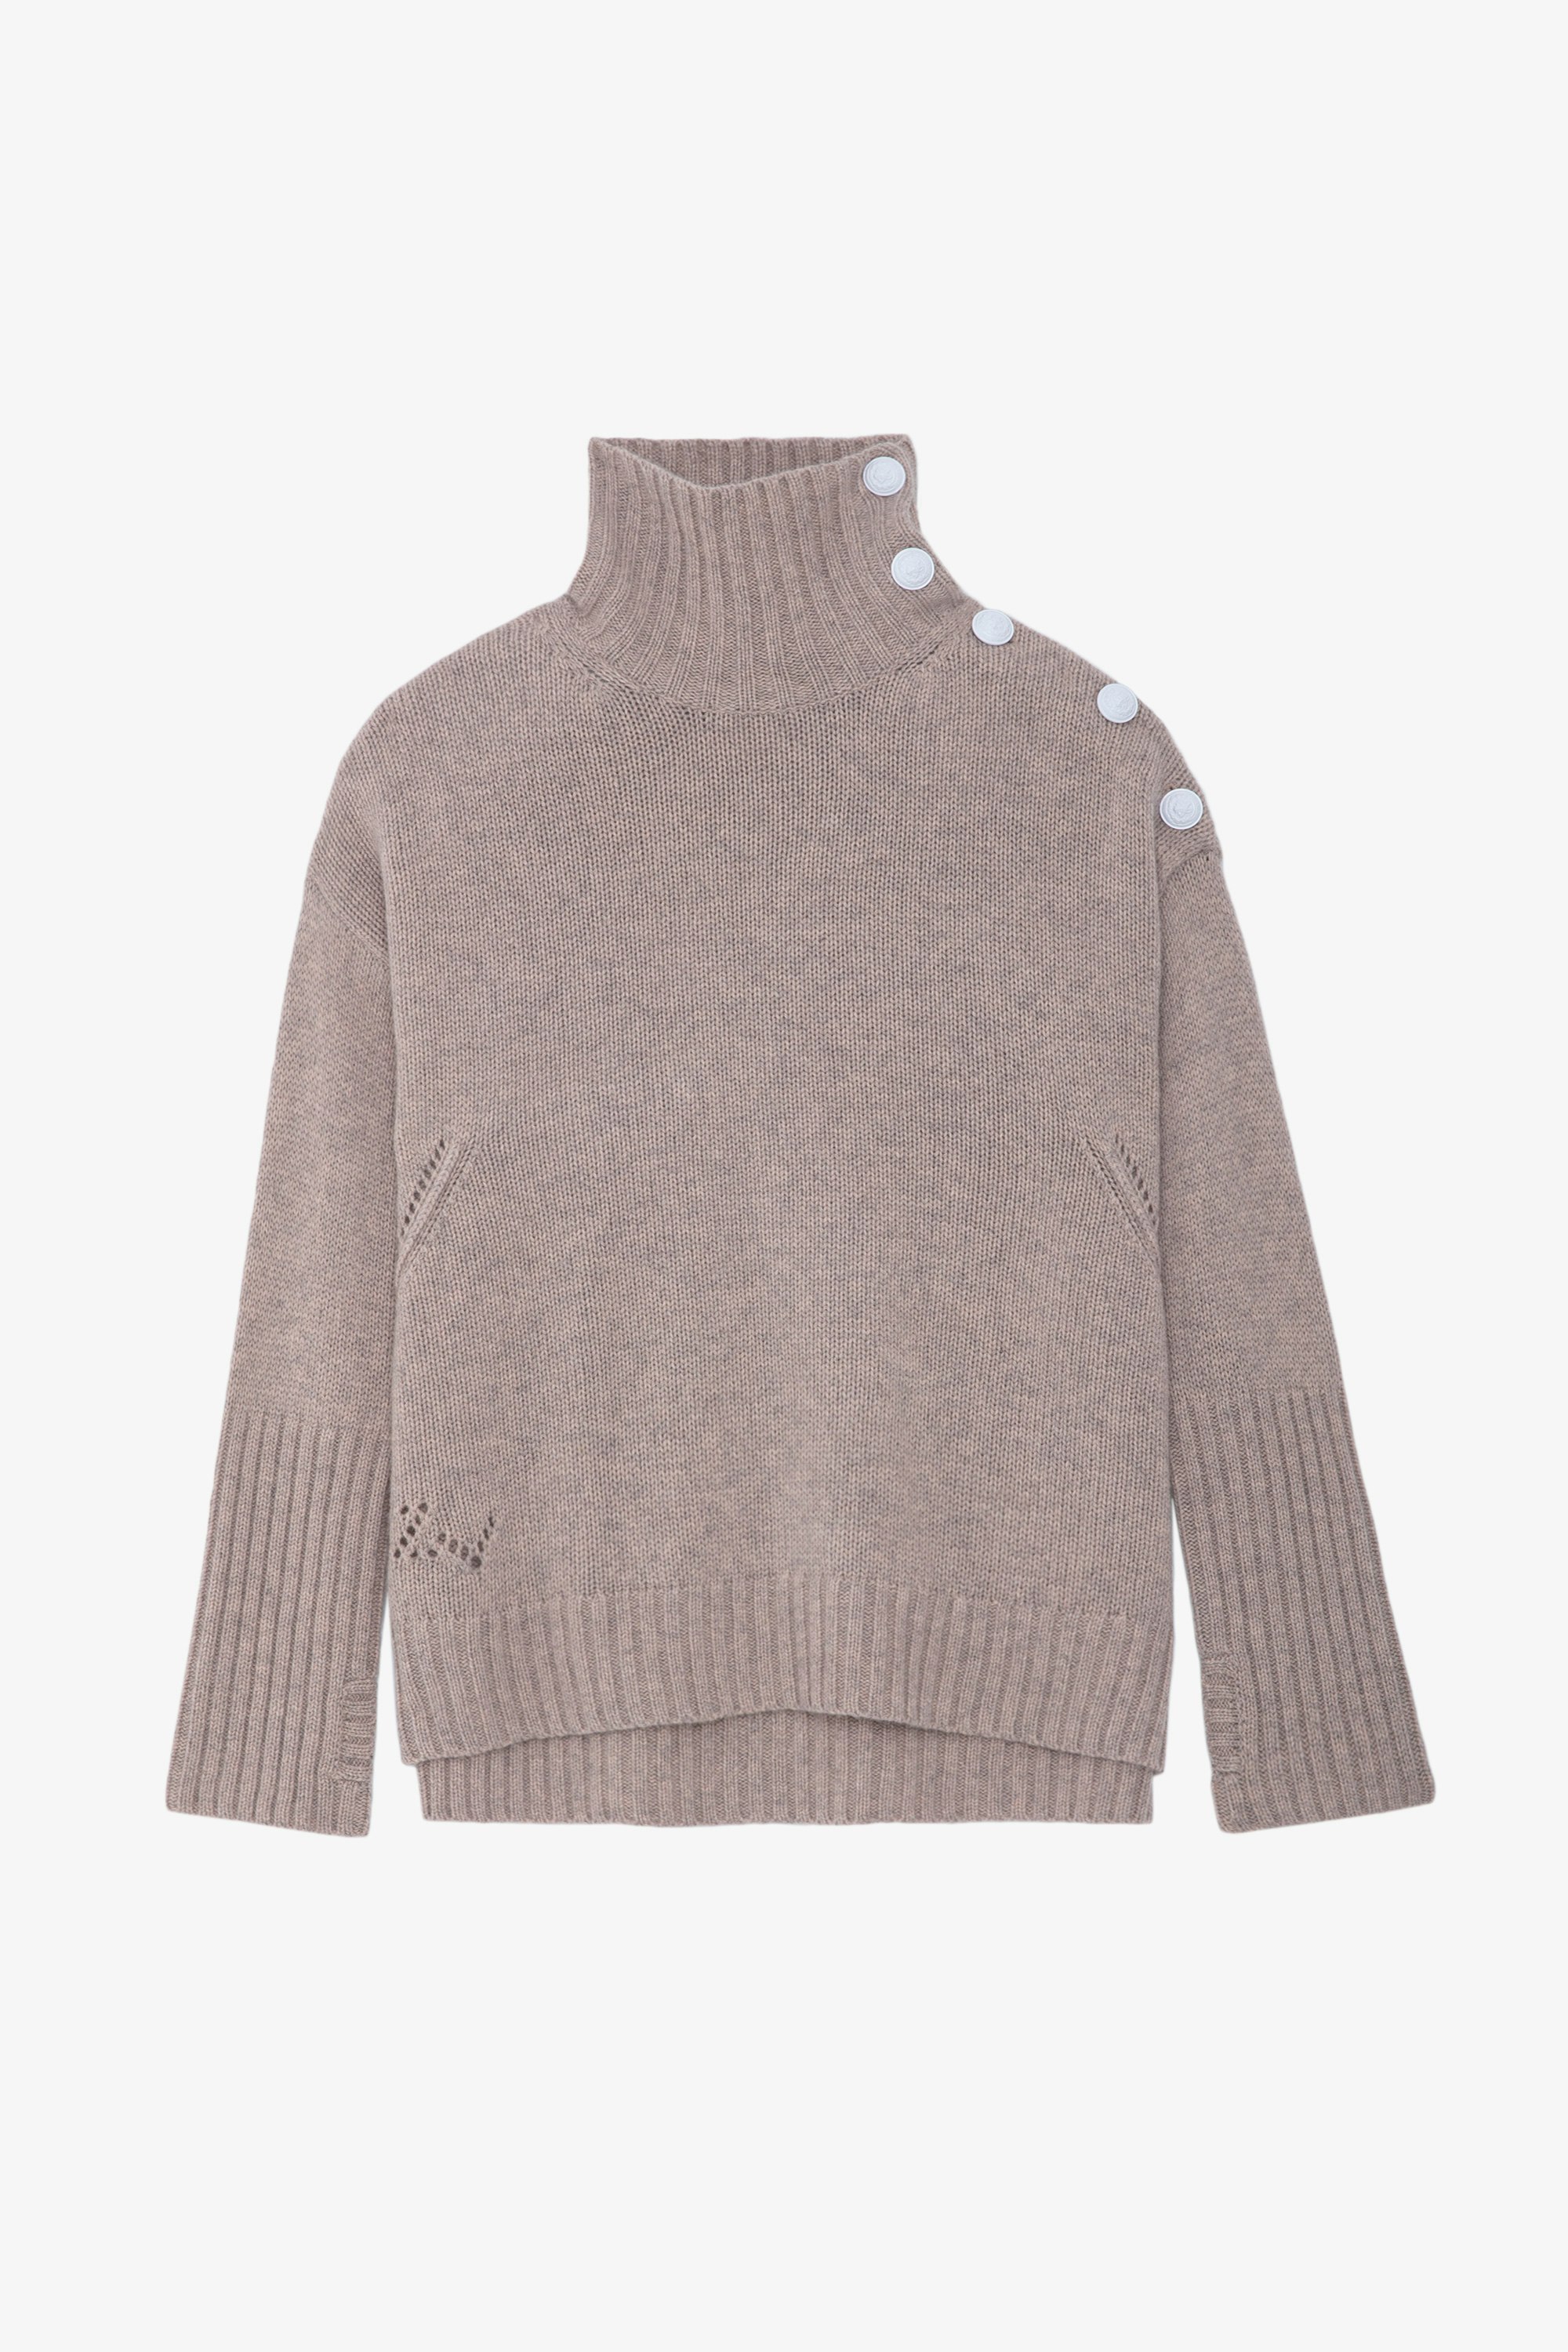 Alma Cashmere Jumper - Pale pink cashmere mock-neck jumper with long sleeves and buttons on the shoulder.